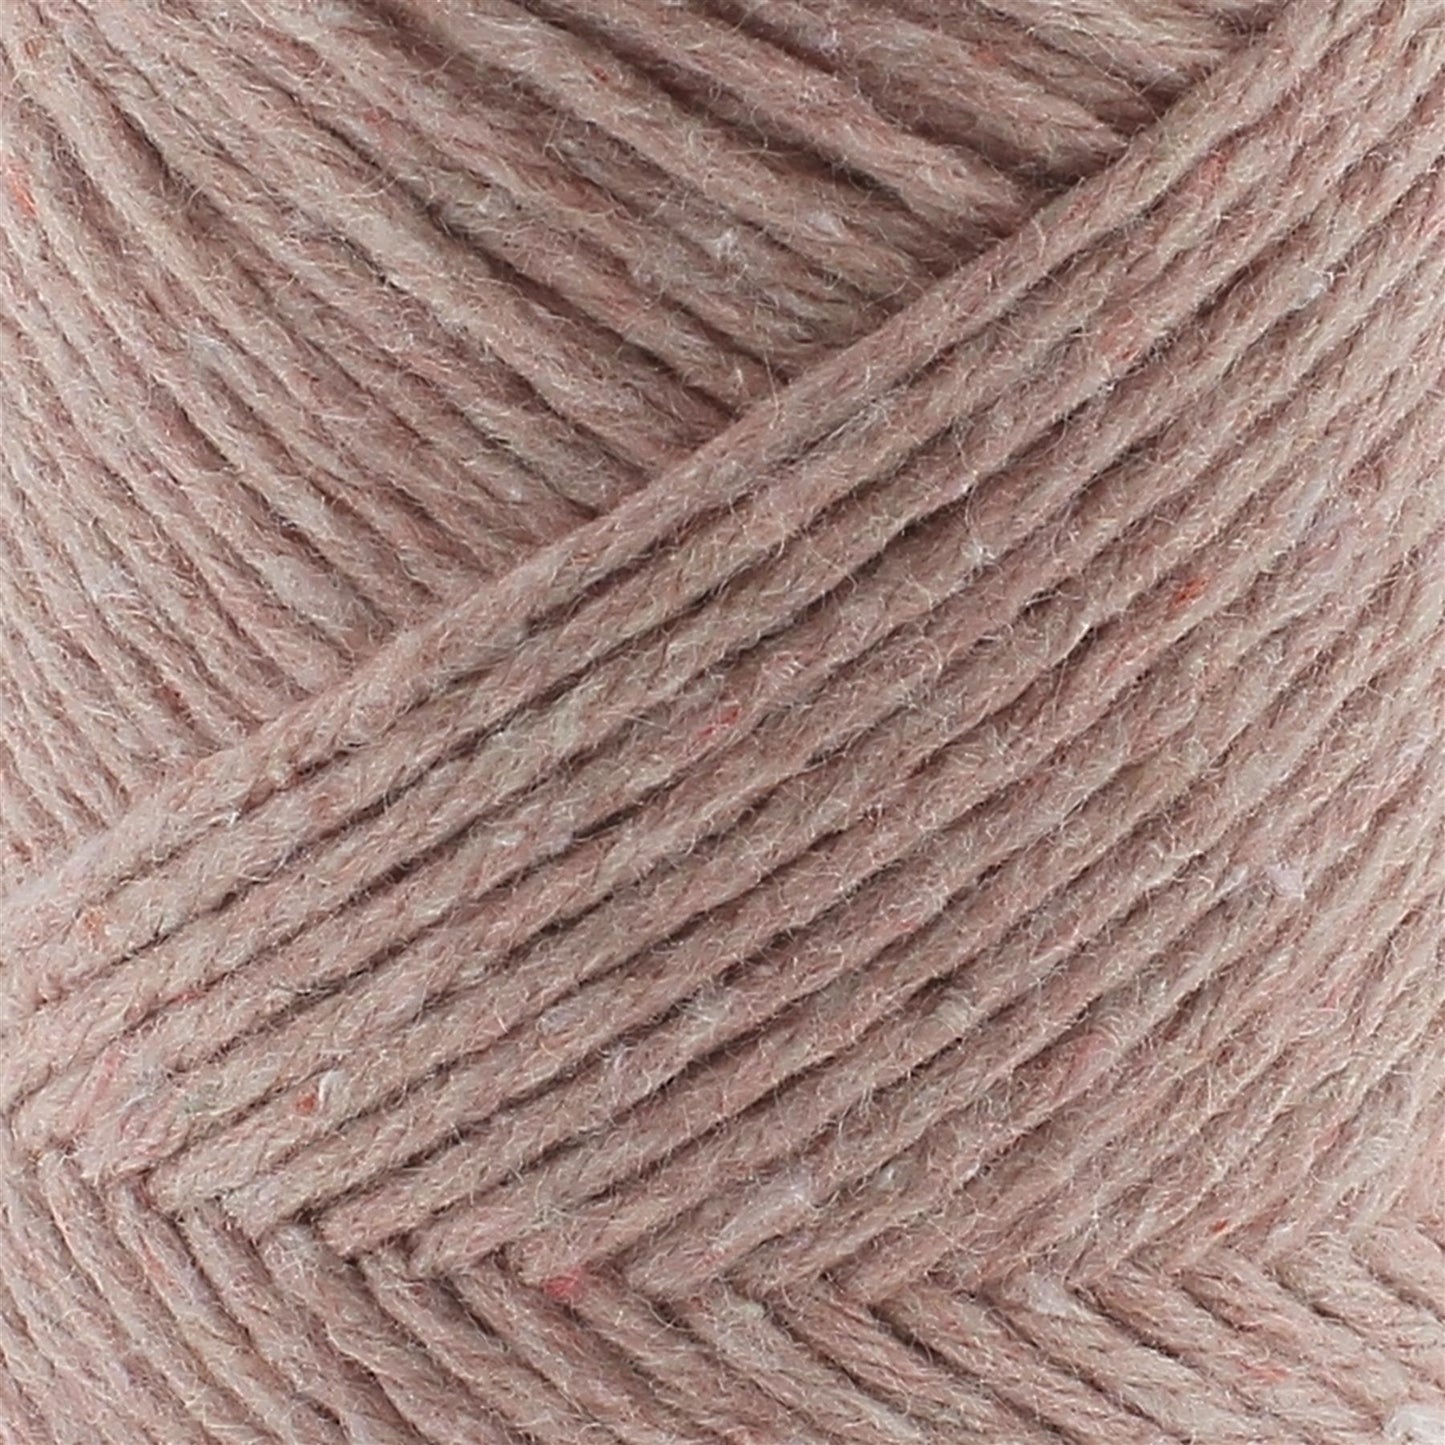 [Hoooked] D700 Eco Barbante Milano Apricot Cotton Yarn - 102M, 100g